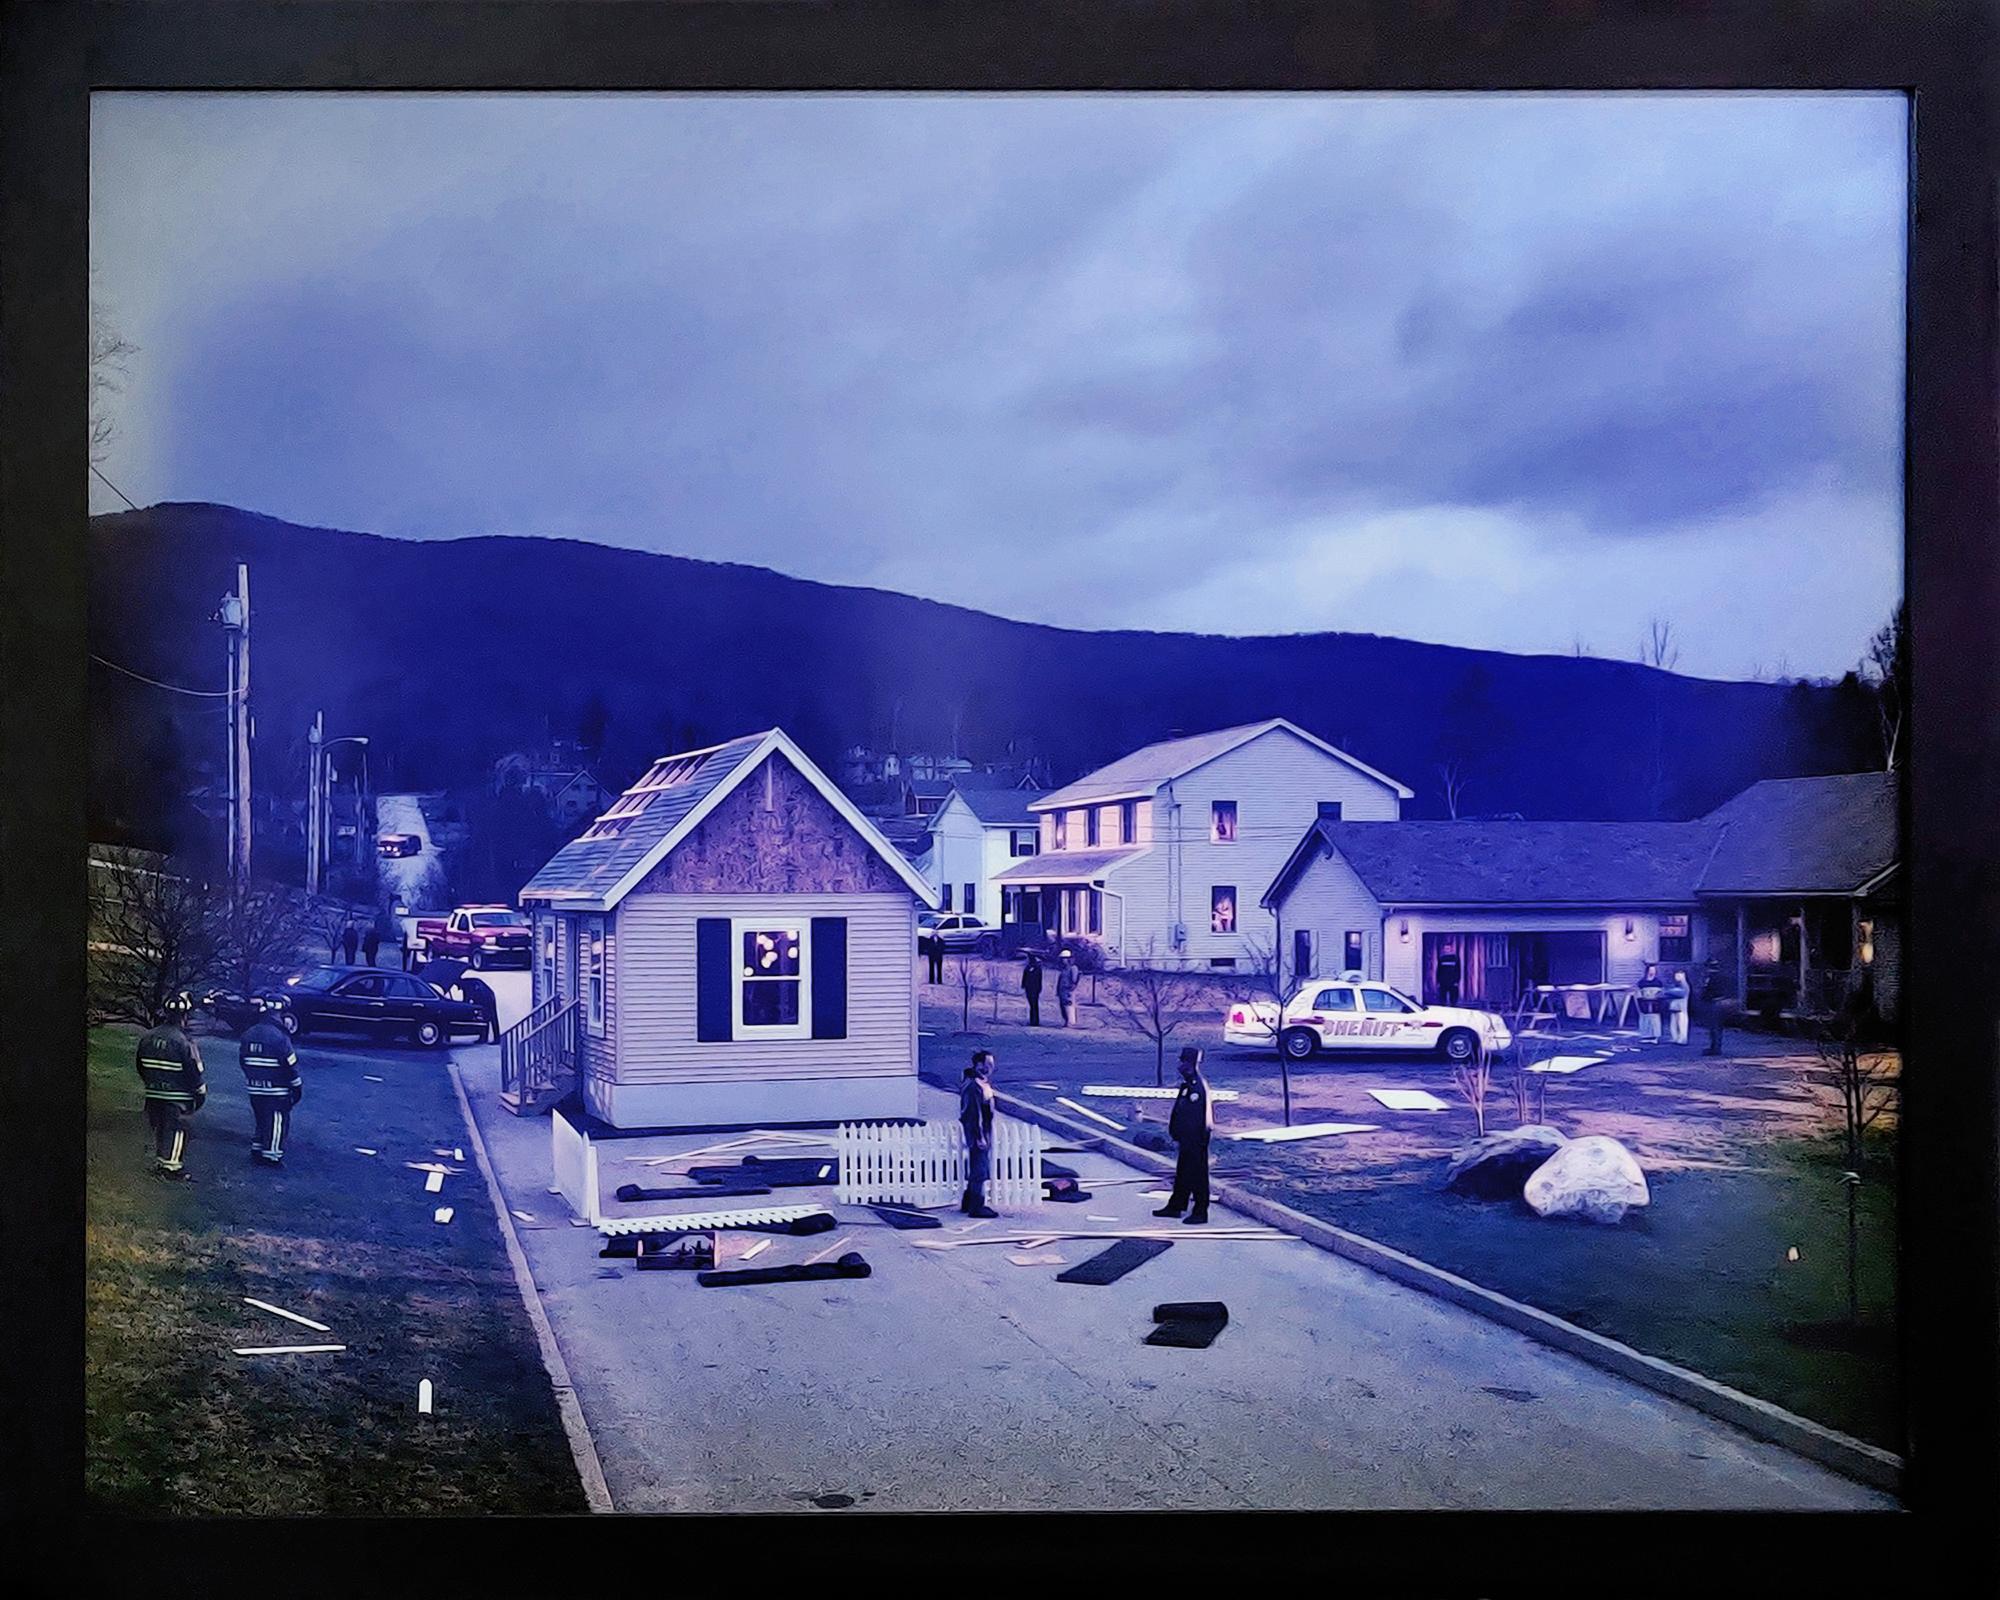 Gregory Crewdson Color Photograph - UNTITLED (HOUSE IN THE ROAD)